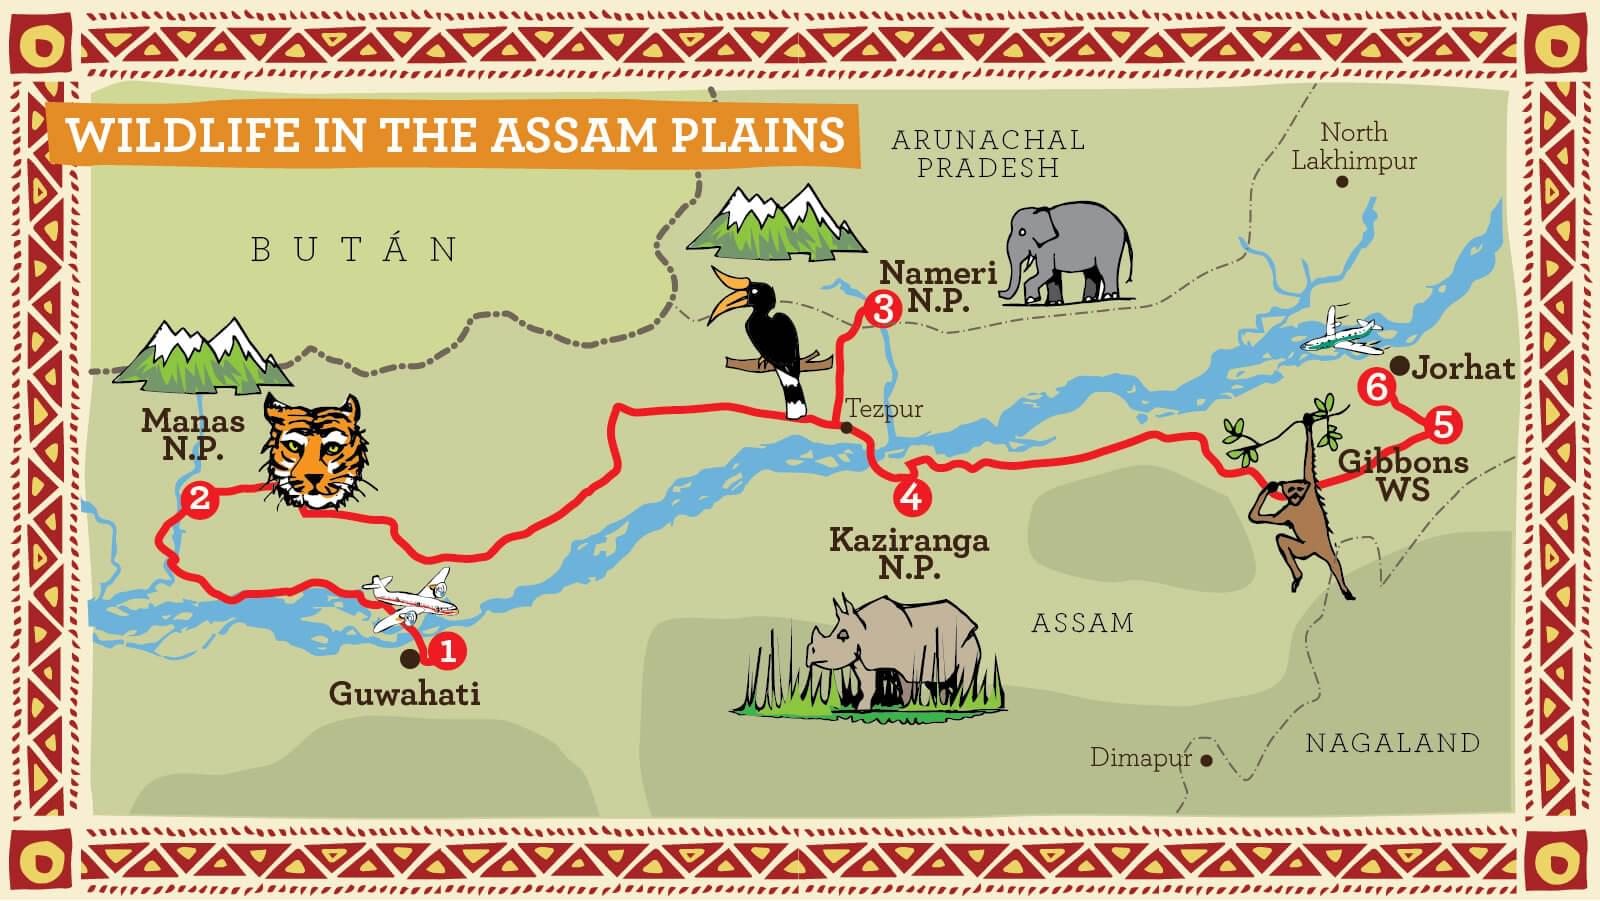 Illustrated Route Map for Assam Wildlife Tour